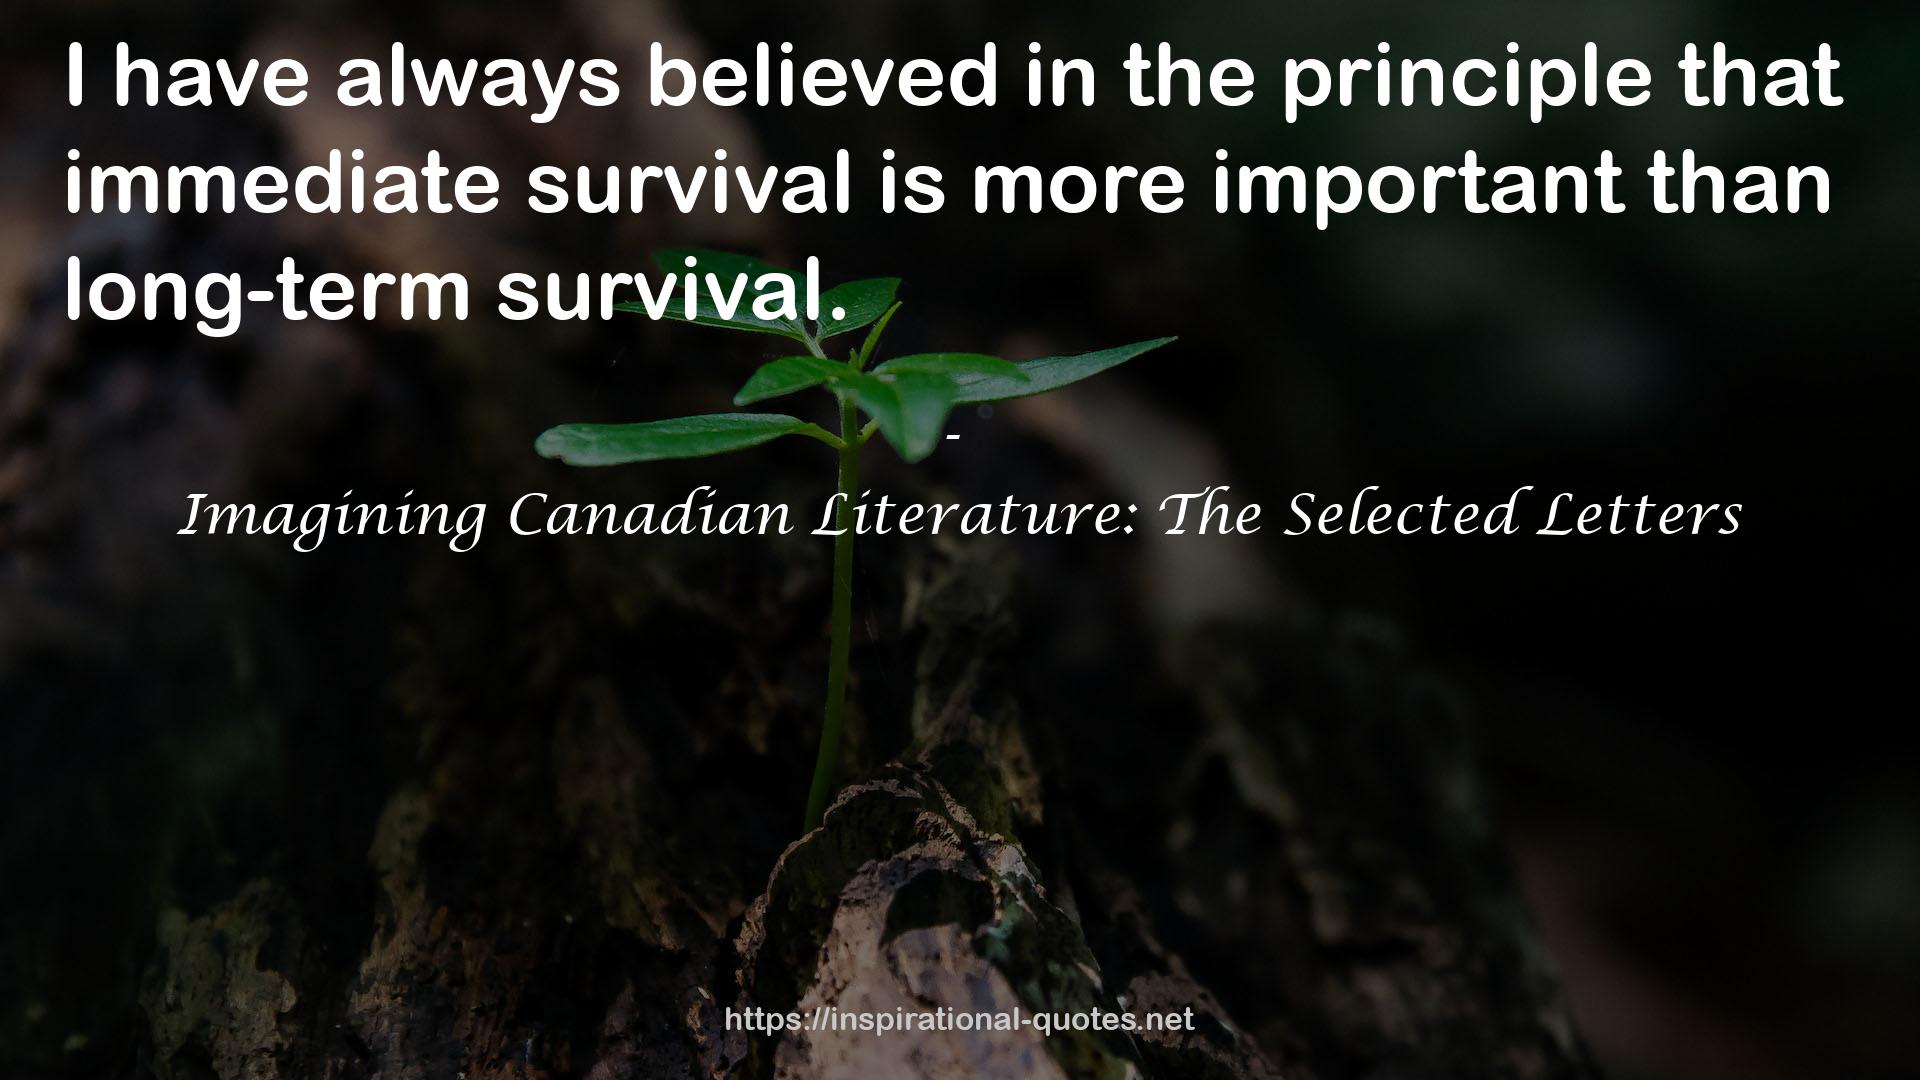 Imagining Canadian Literature: The Selected Letters QUOTES